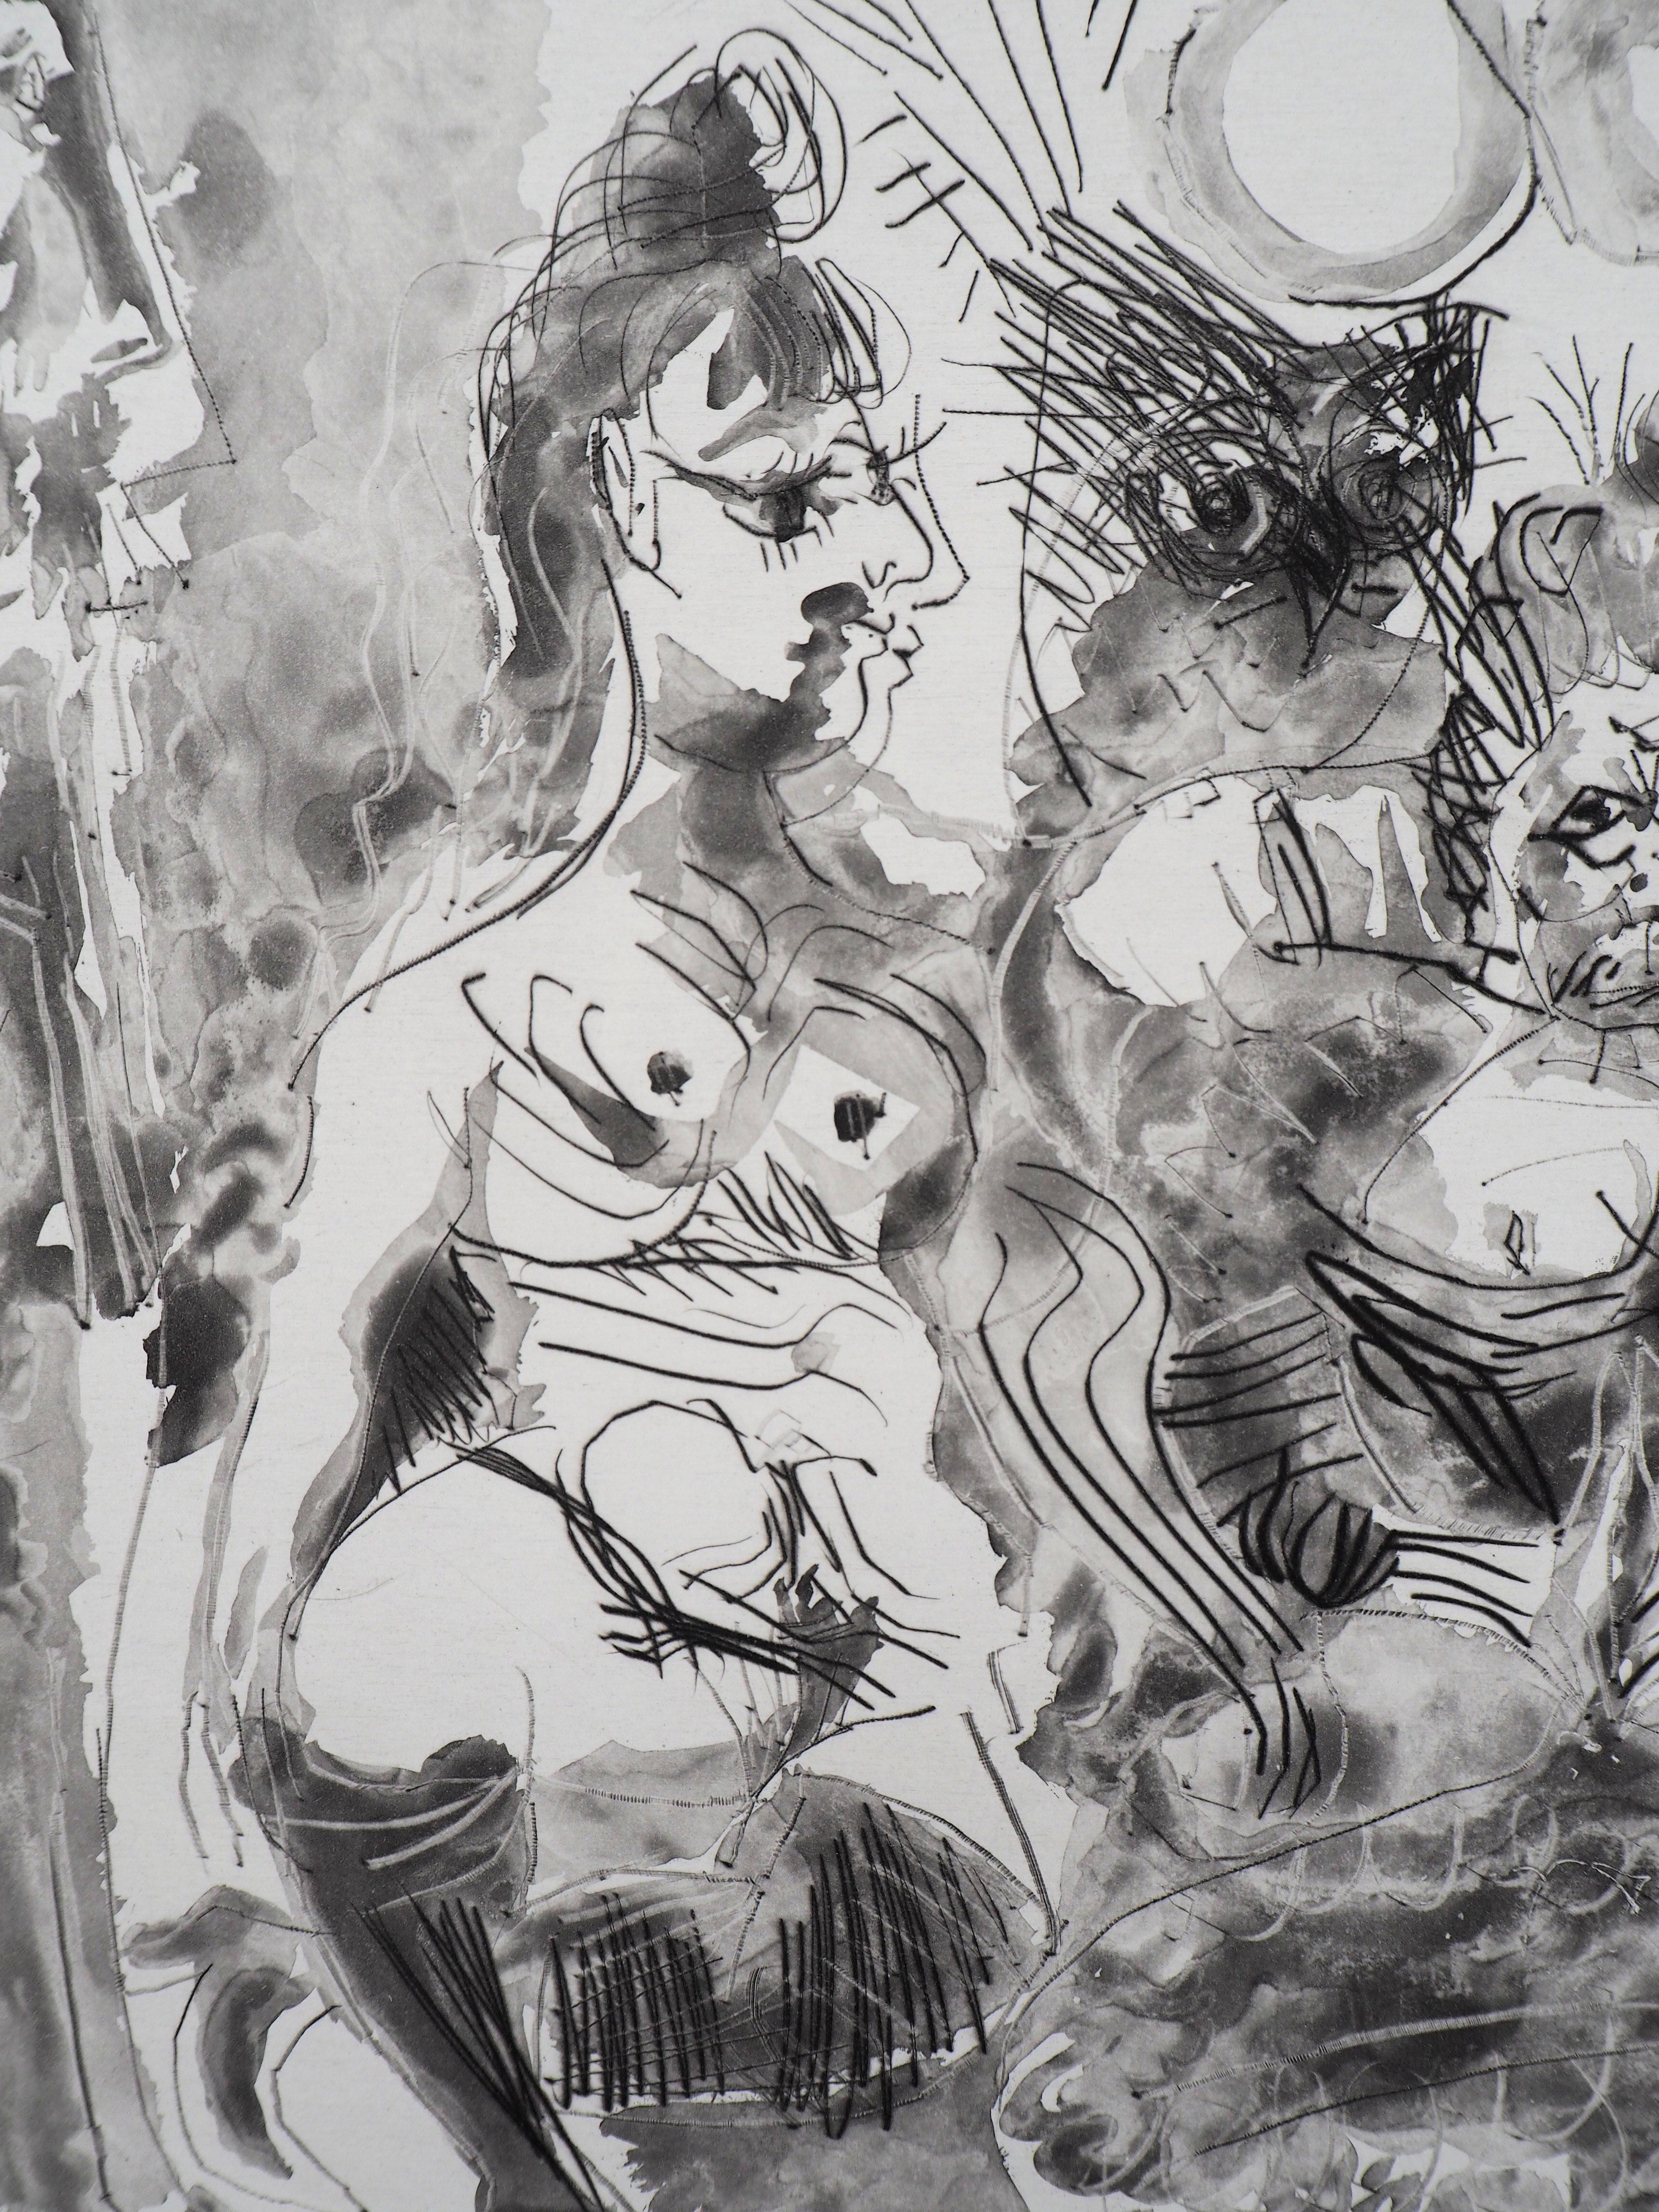 Pablo PICASSO
Tribute to Degas : Three Nudes

Original etching and aquatint
Signed with the artist stamp bottom right
Numbered in pencil 4/50
On vellum 36 x 45 cm (c. 14.5 x 18 inch)

REFERENCES : 
- Catalog raisonne Bloch #2007
- Catalog raisonne